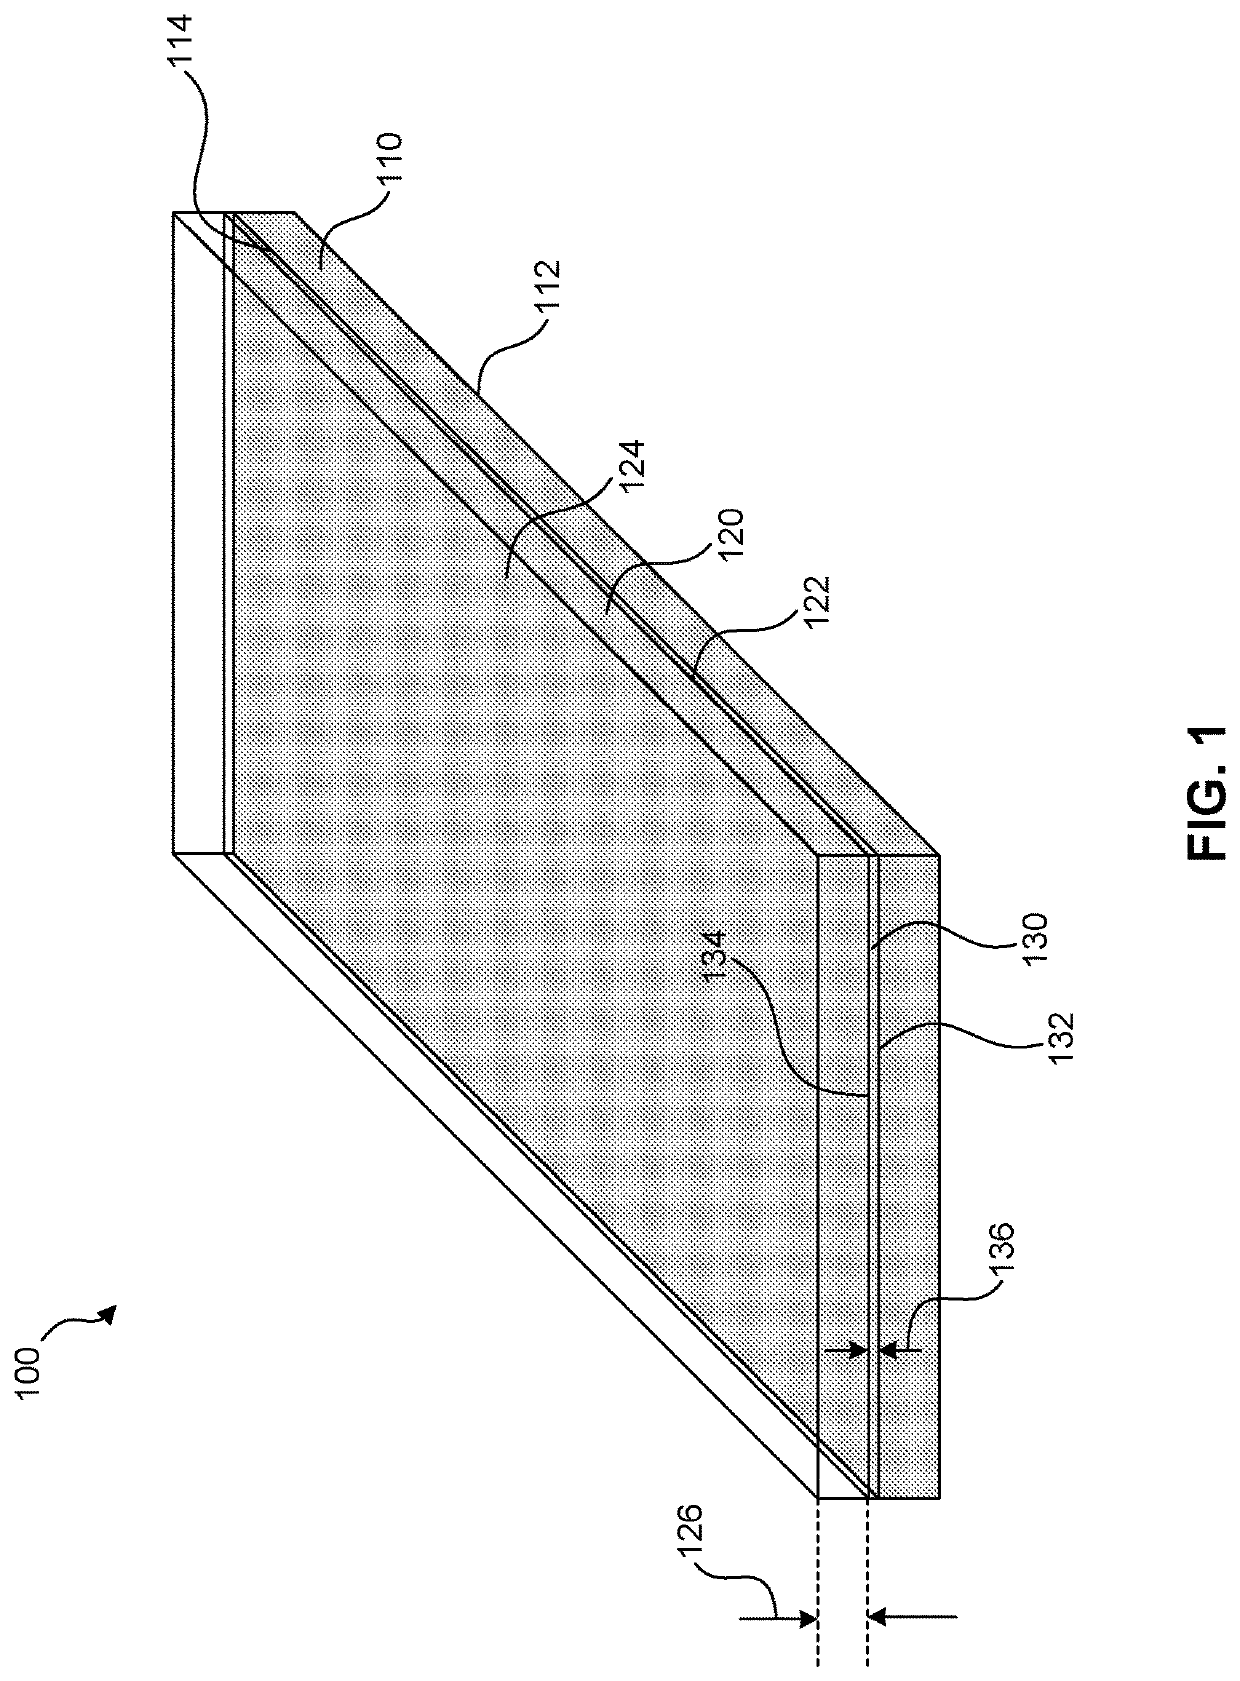 Bendable articles including adhesive layer with a dynamic elastic modulus